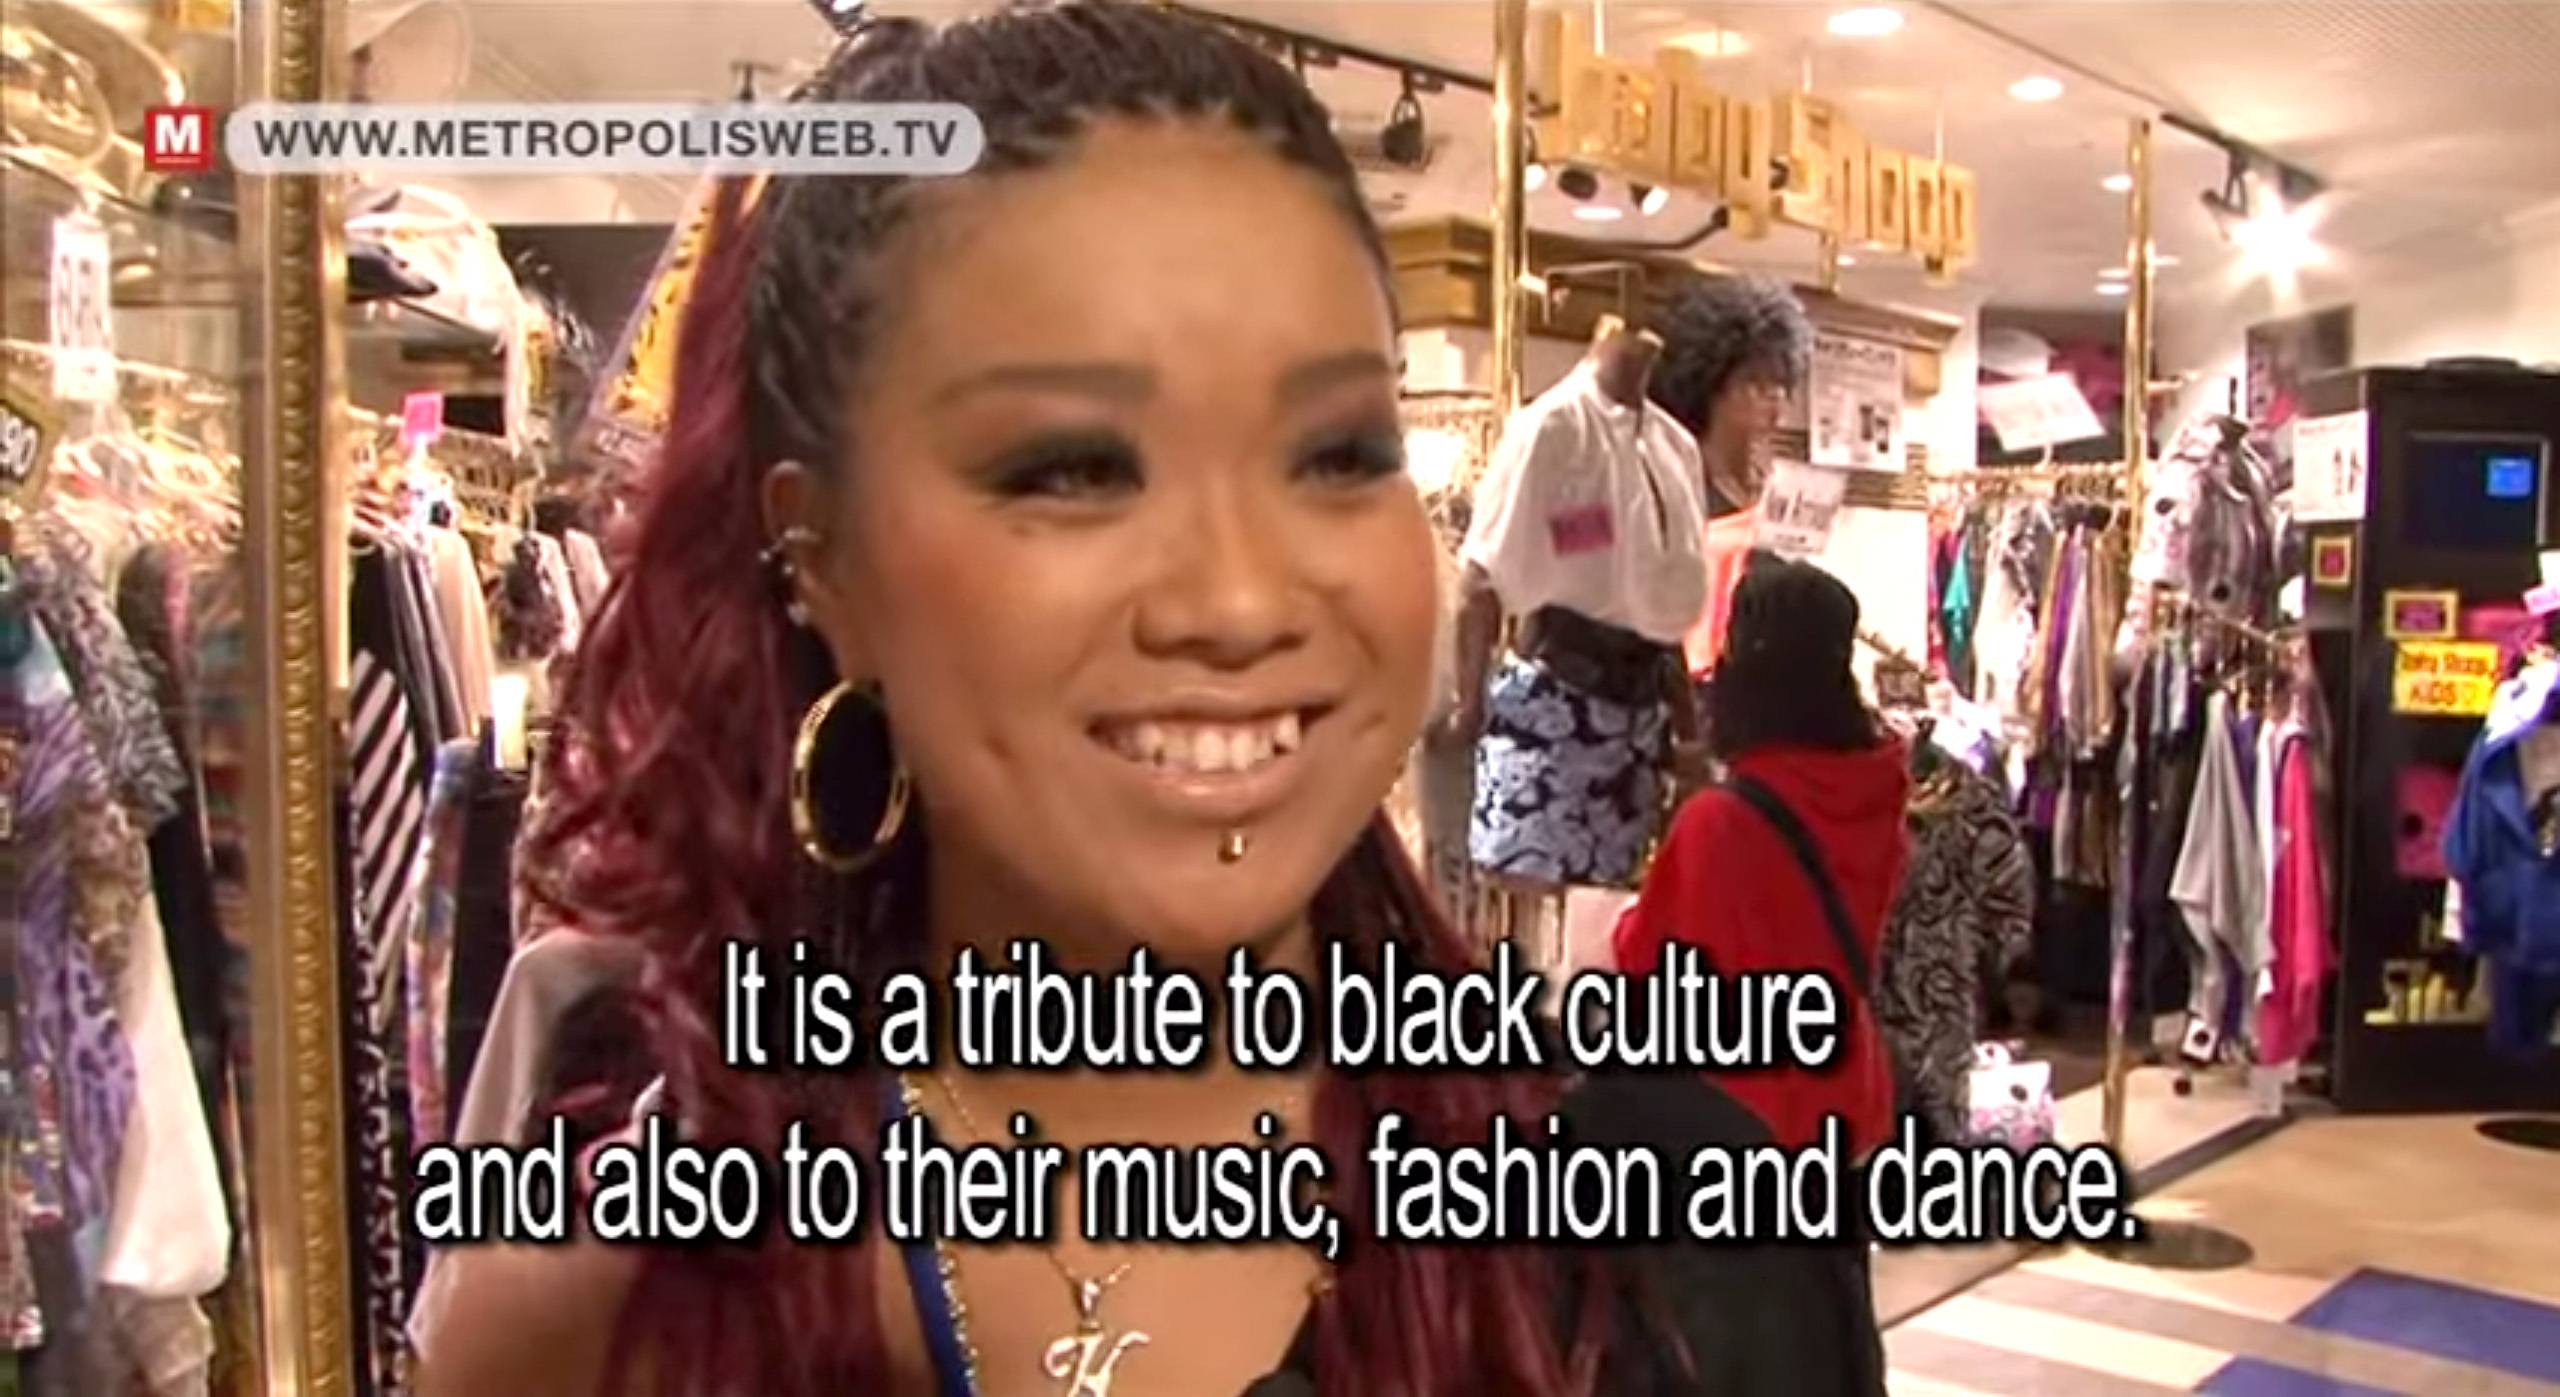 Japanese 'B-Style' Youth Want to Be Black